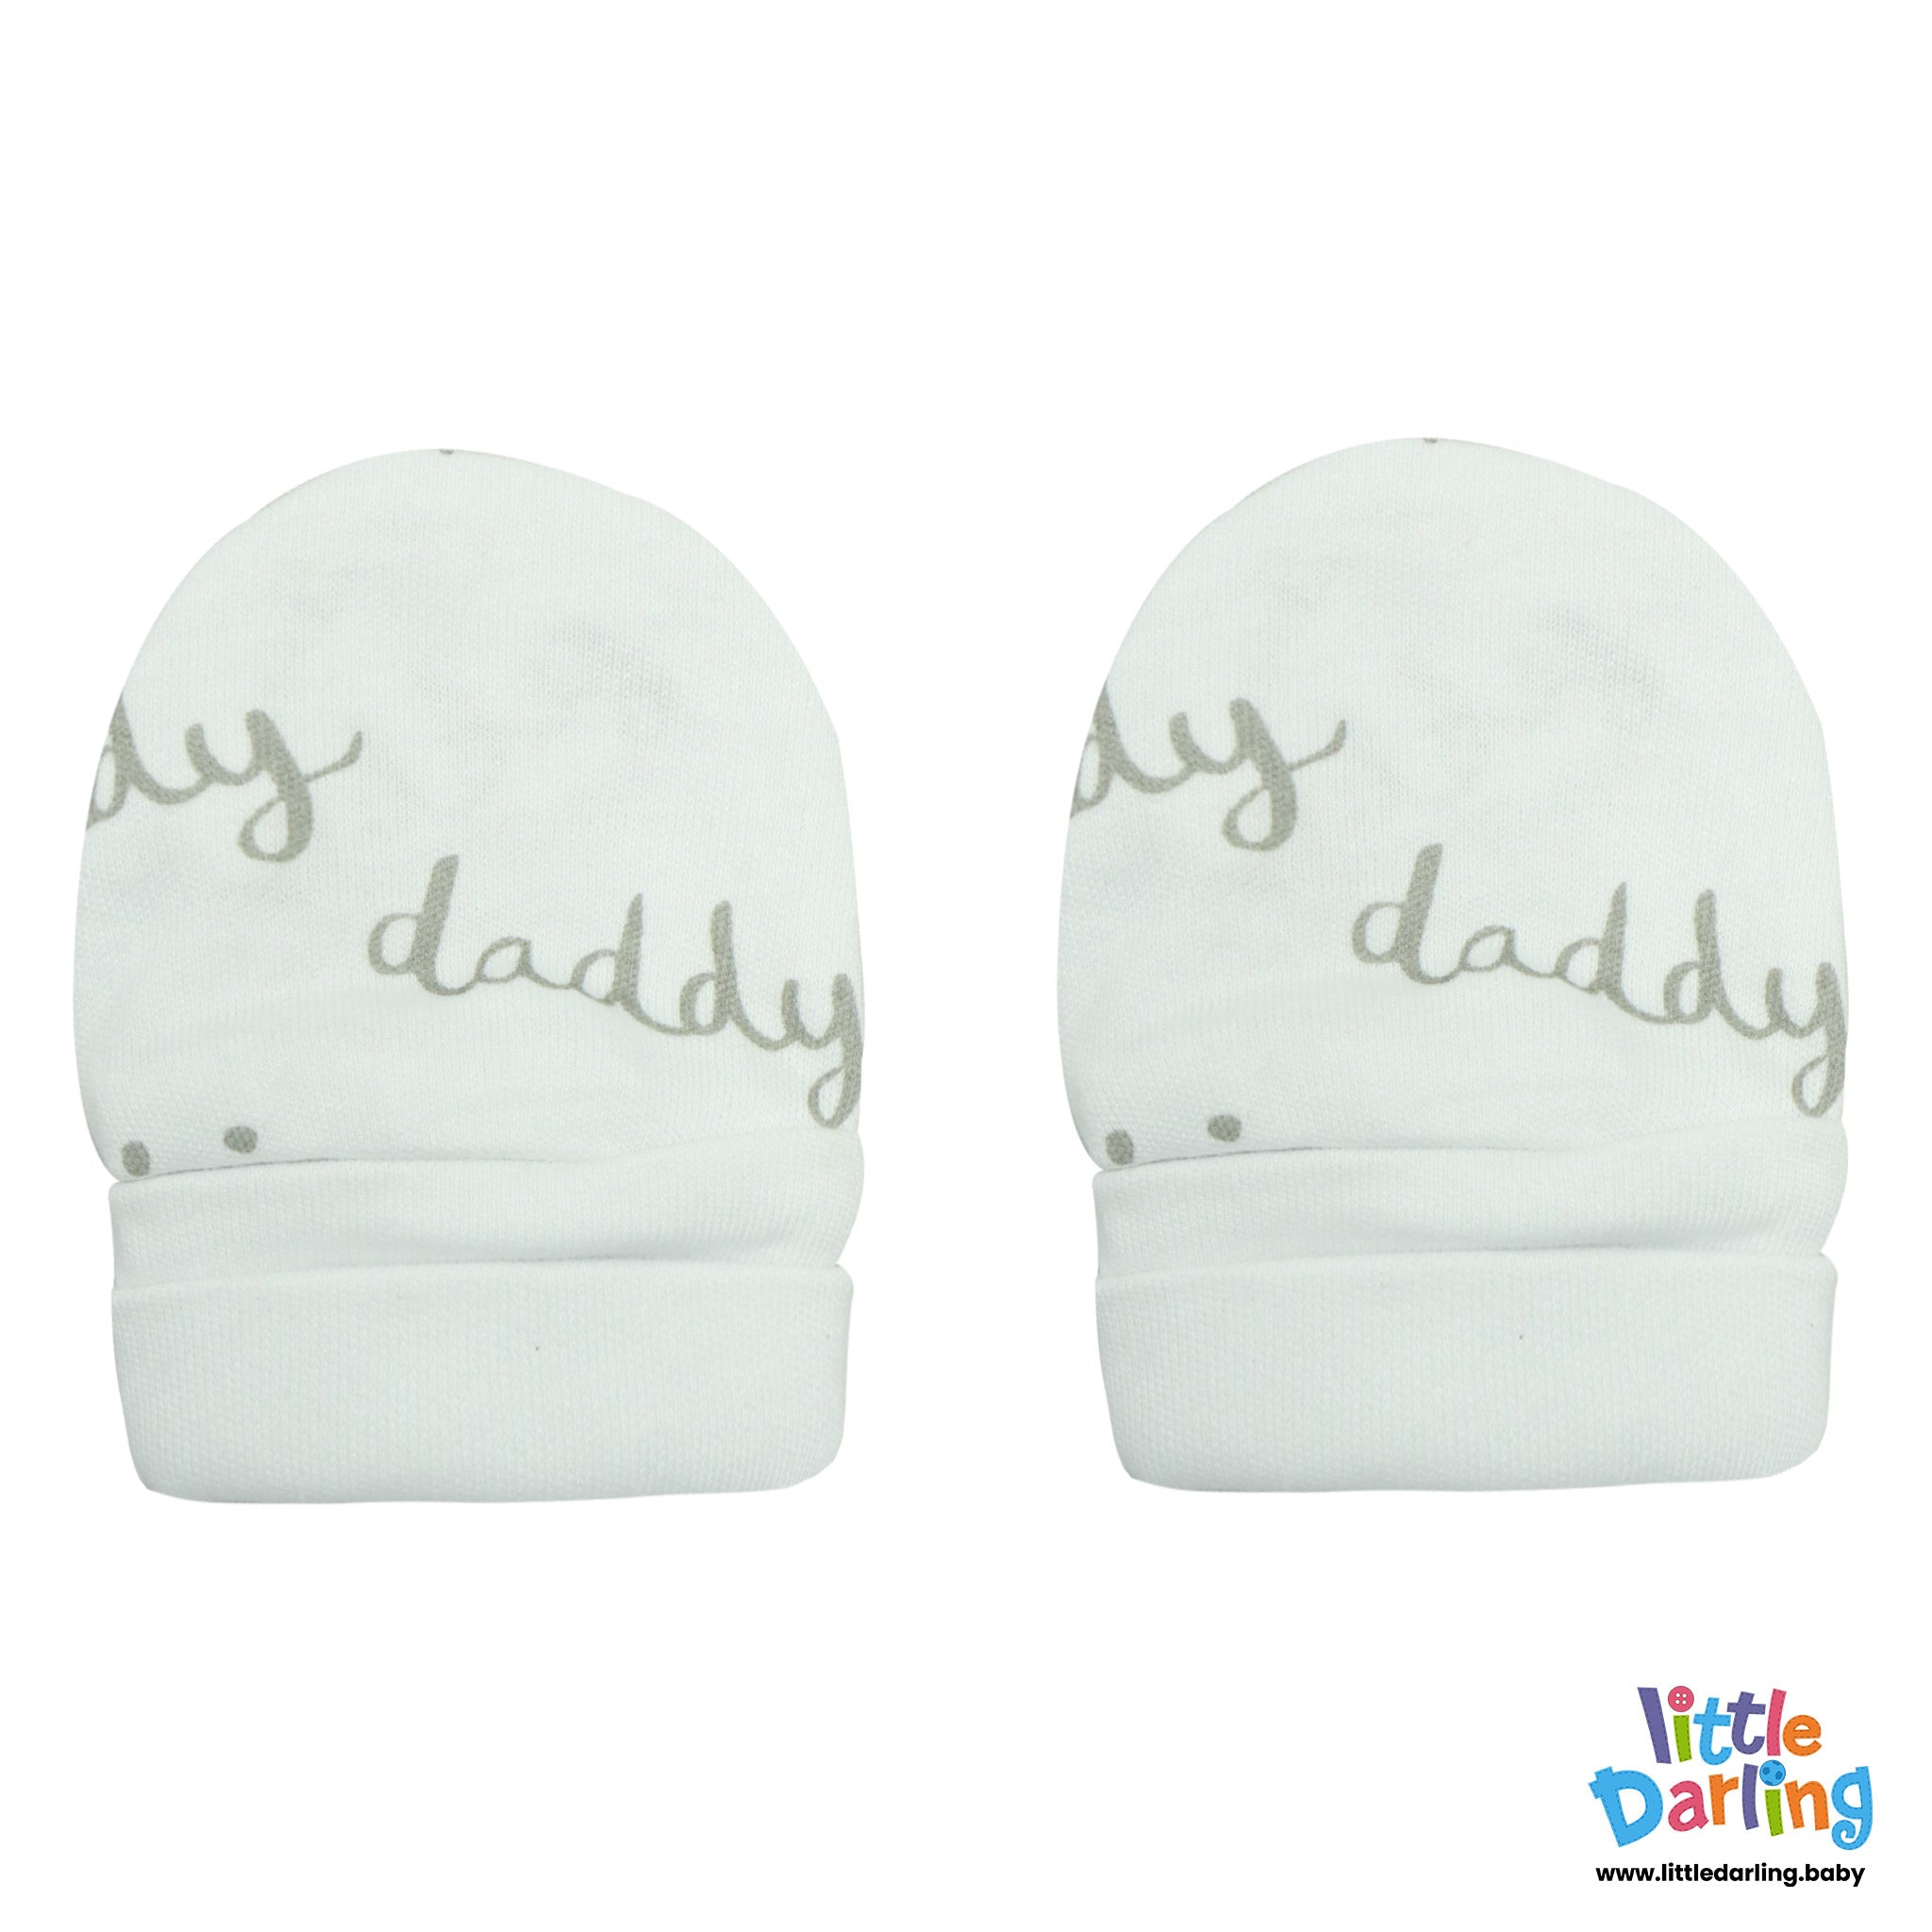 Baby Mittens Pair Pk Of 2 I Love Mummy Daddy Print by Little Darling